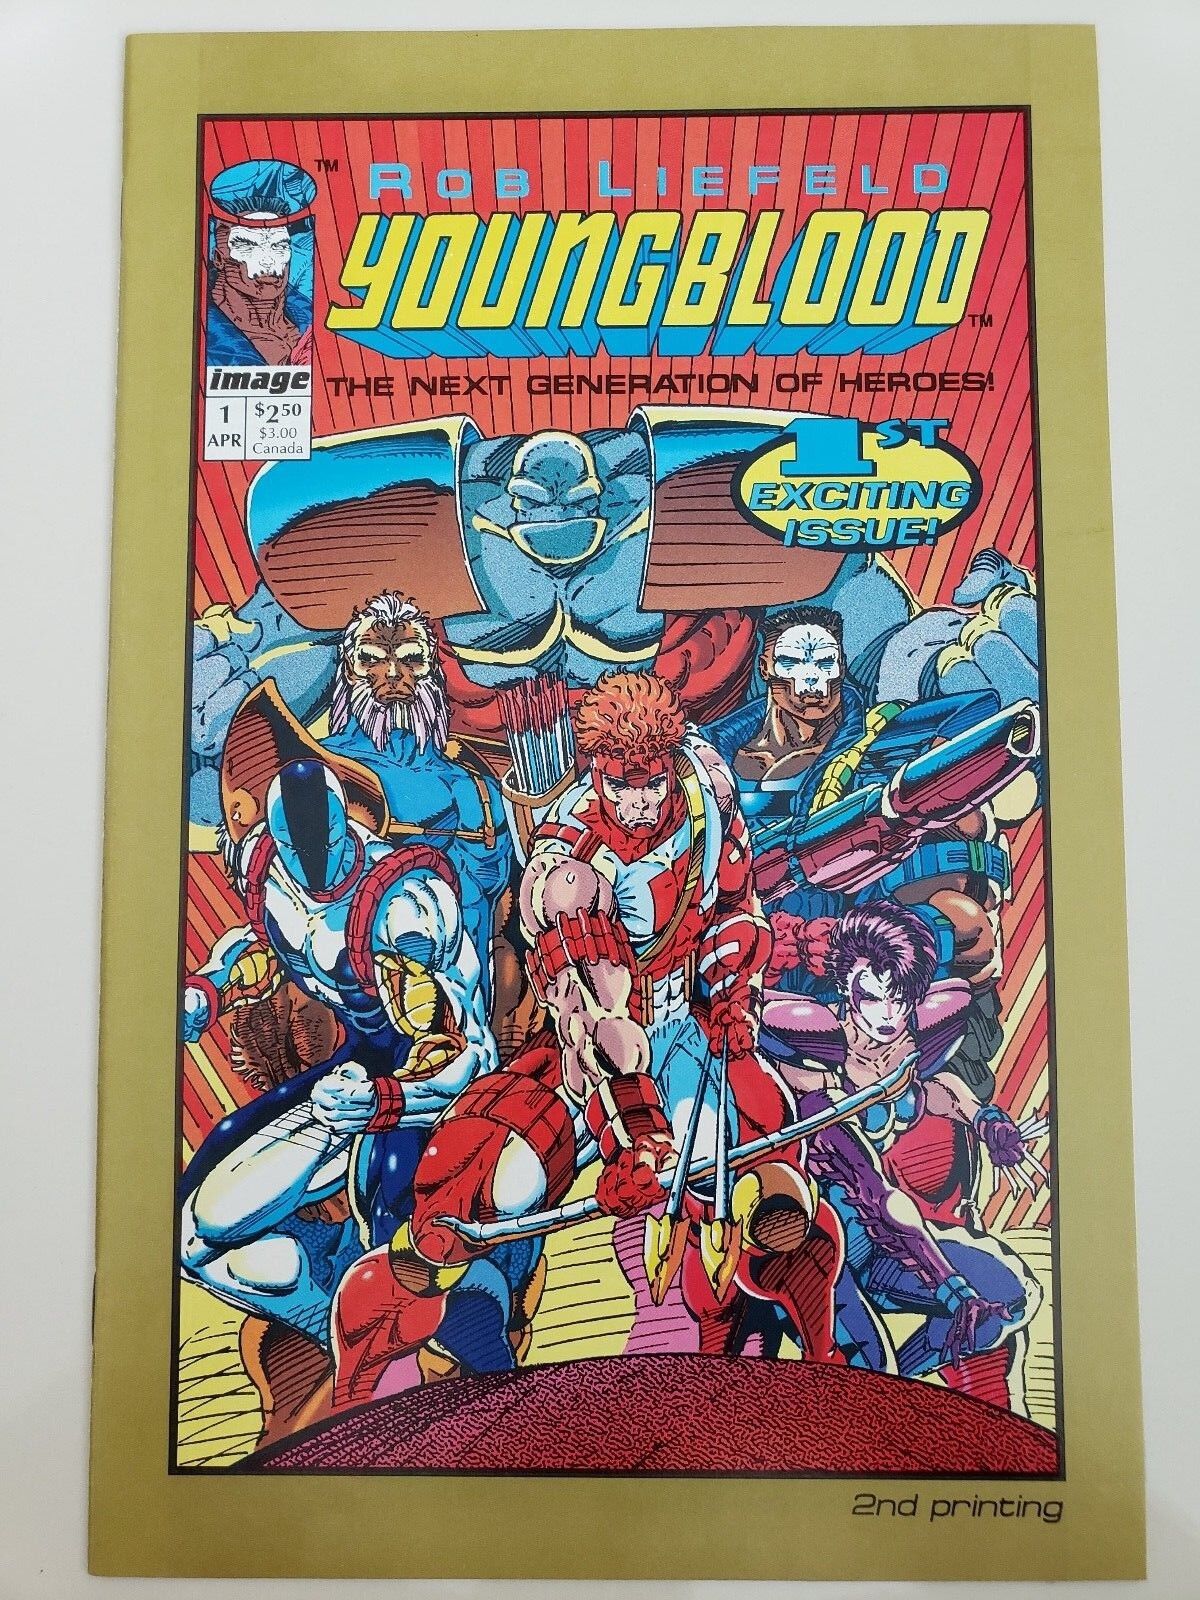 YOUNGBLOOD #1 (1992) IMAGE COMICS ROB LIEFELD ART 2ND PRINT GOLD VARIANT COVER